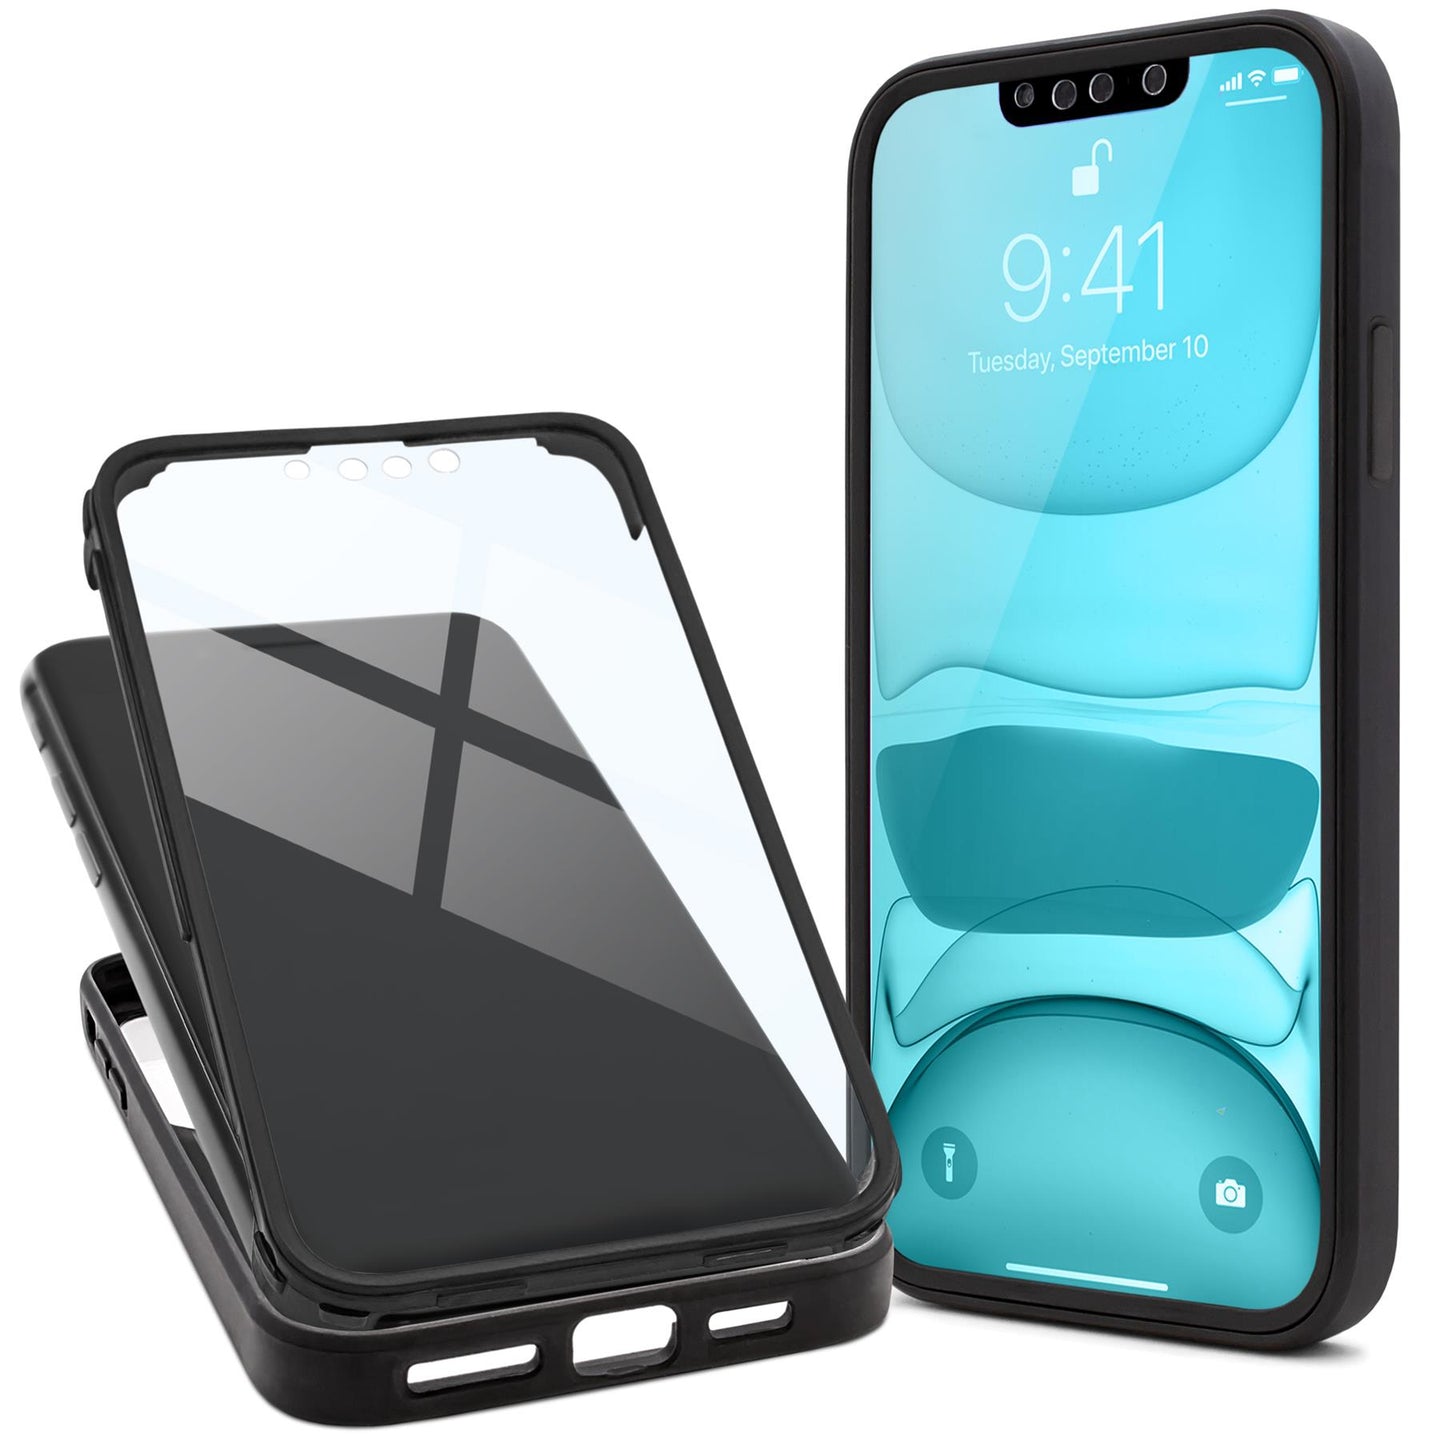 Moozy 360 Case for iPhone 13 Pro Max - Black Rim Transparent Case, Full Body Double-sided Protection, Cover with Built-in Screen Protector